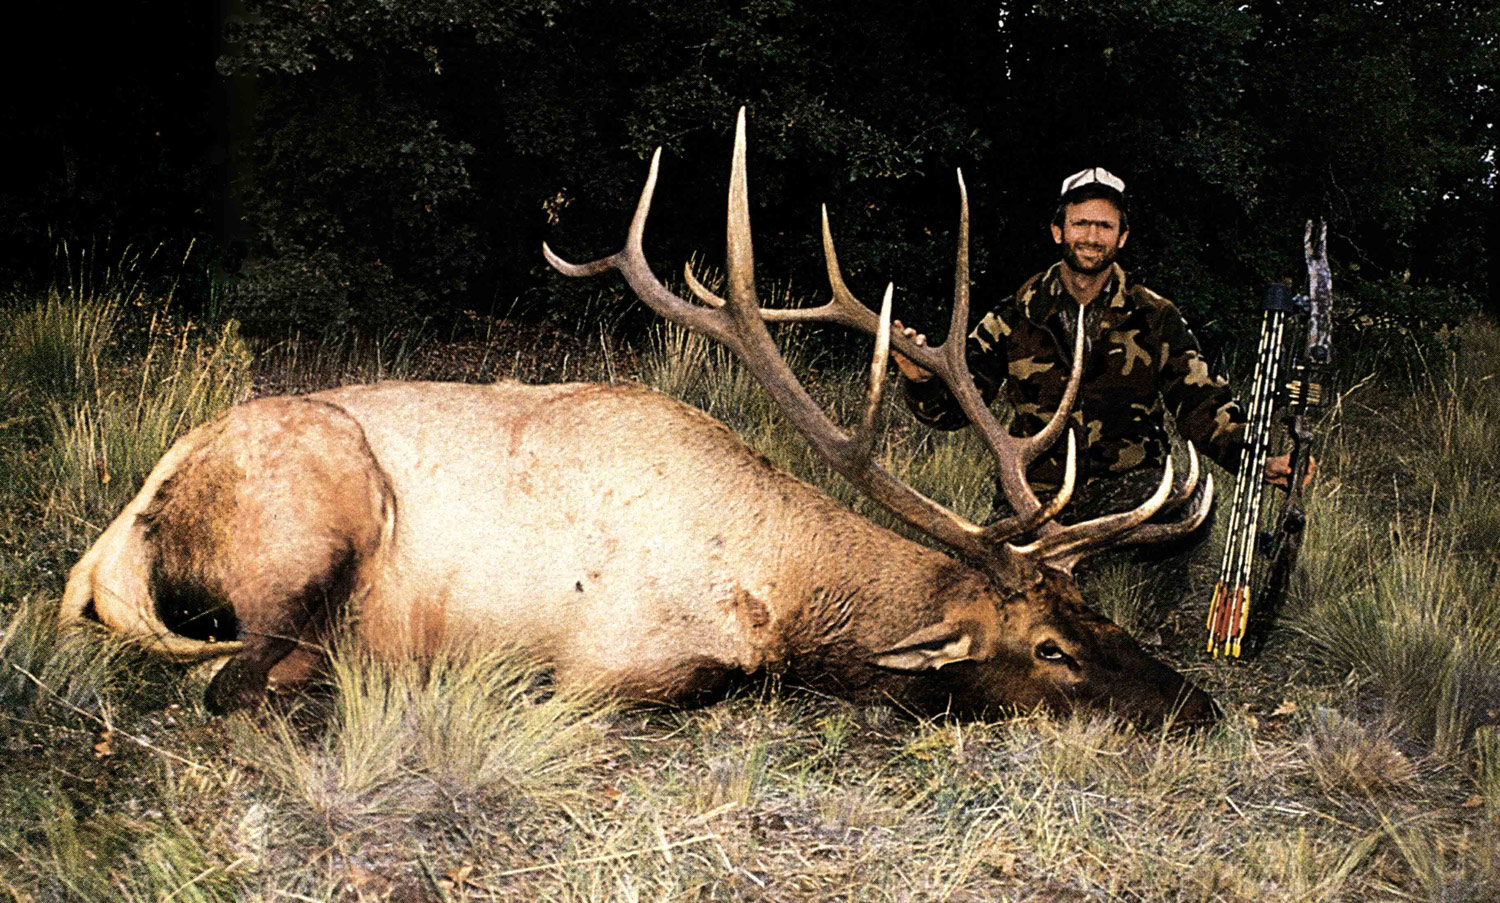 hunter holding compound bow poses behind very large elk